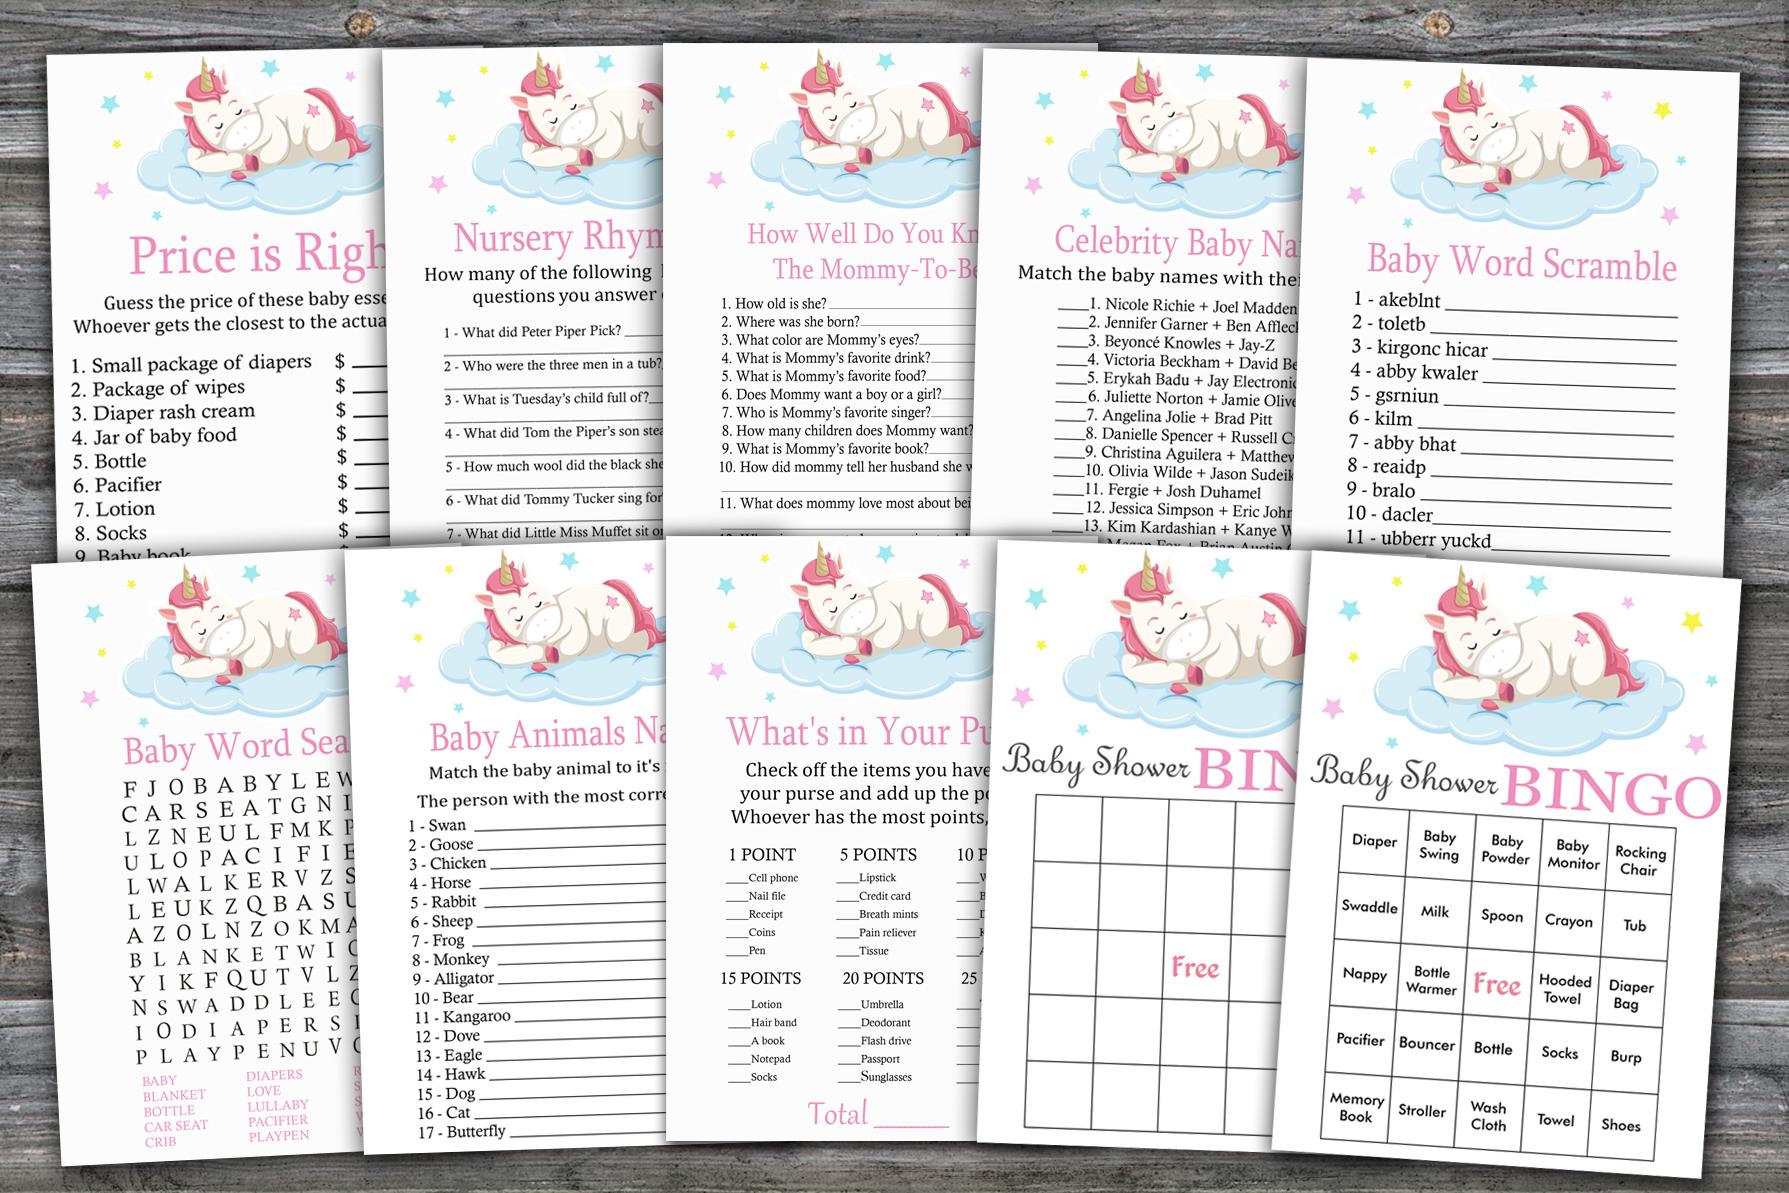 Sleeping Unicorn baby shower games package,Unicorn rainbow Baby Shower Game package,Unicorn theme Baby Shower Game,9 Printable Games,INSTANT DOWNLOAD-318